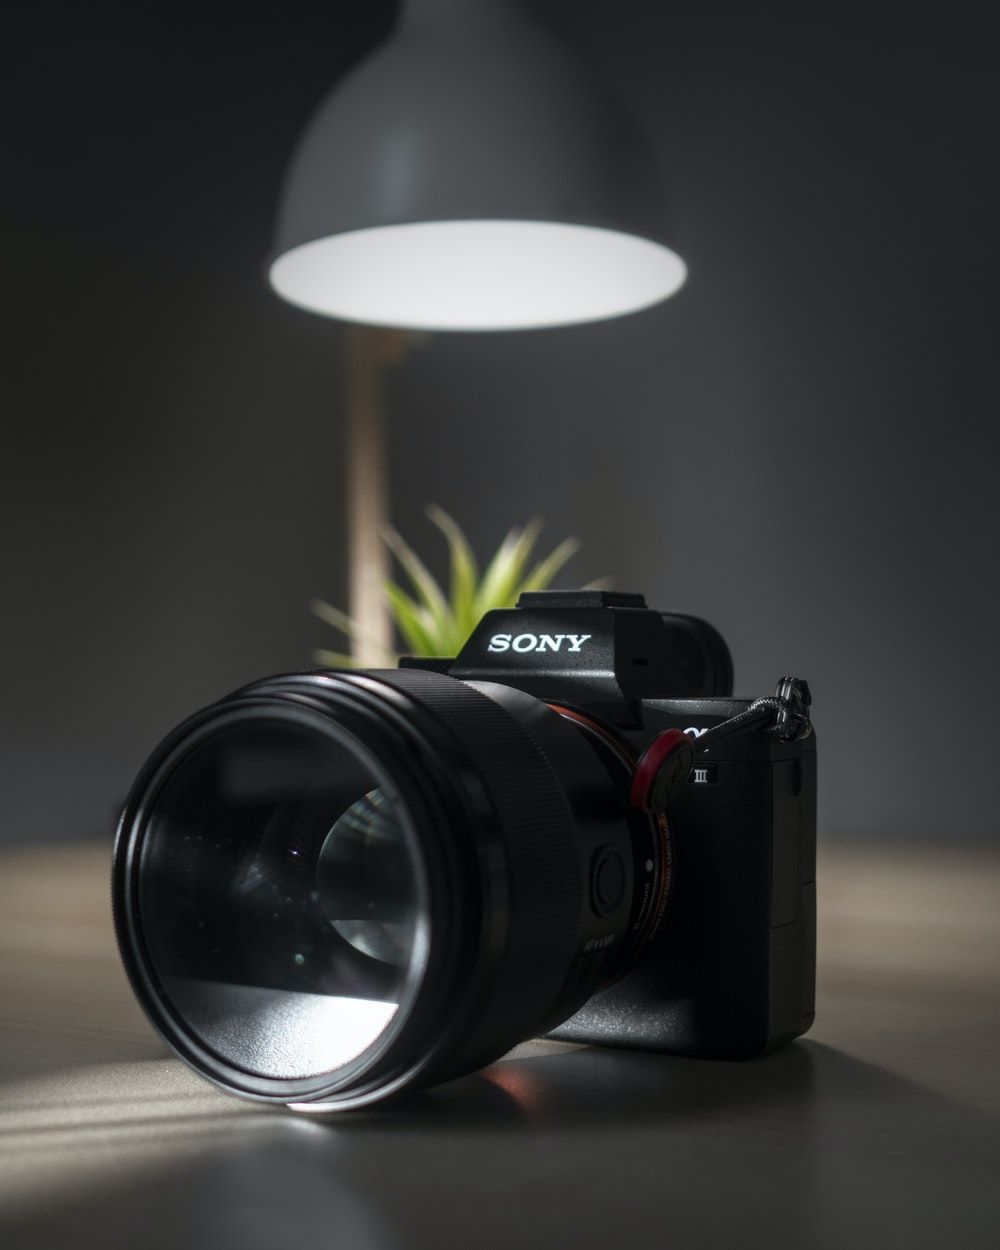 Sony Mirrorless Picture. Download Free Image